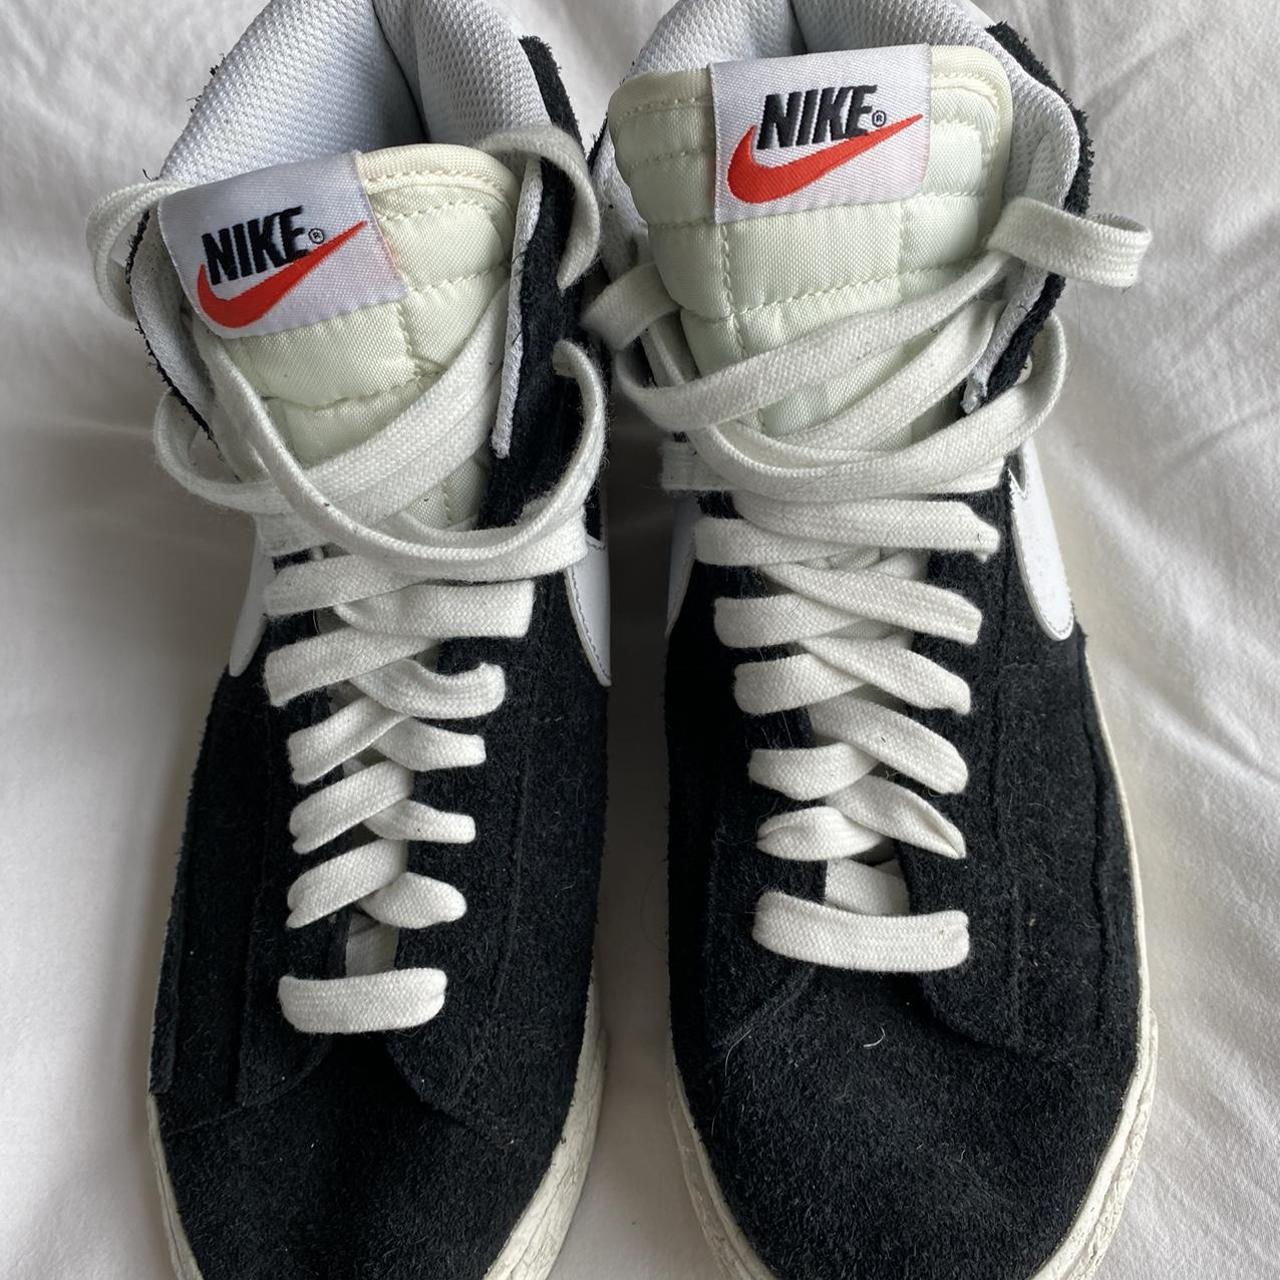 NIKE BLAZERS MID 77 - black and white excellent... - Depop